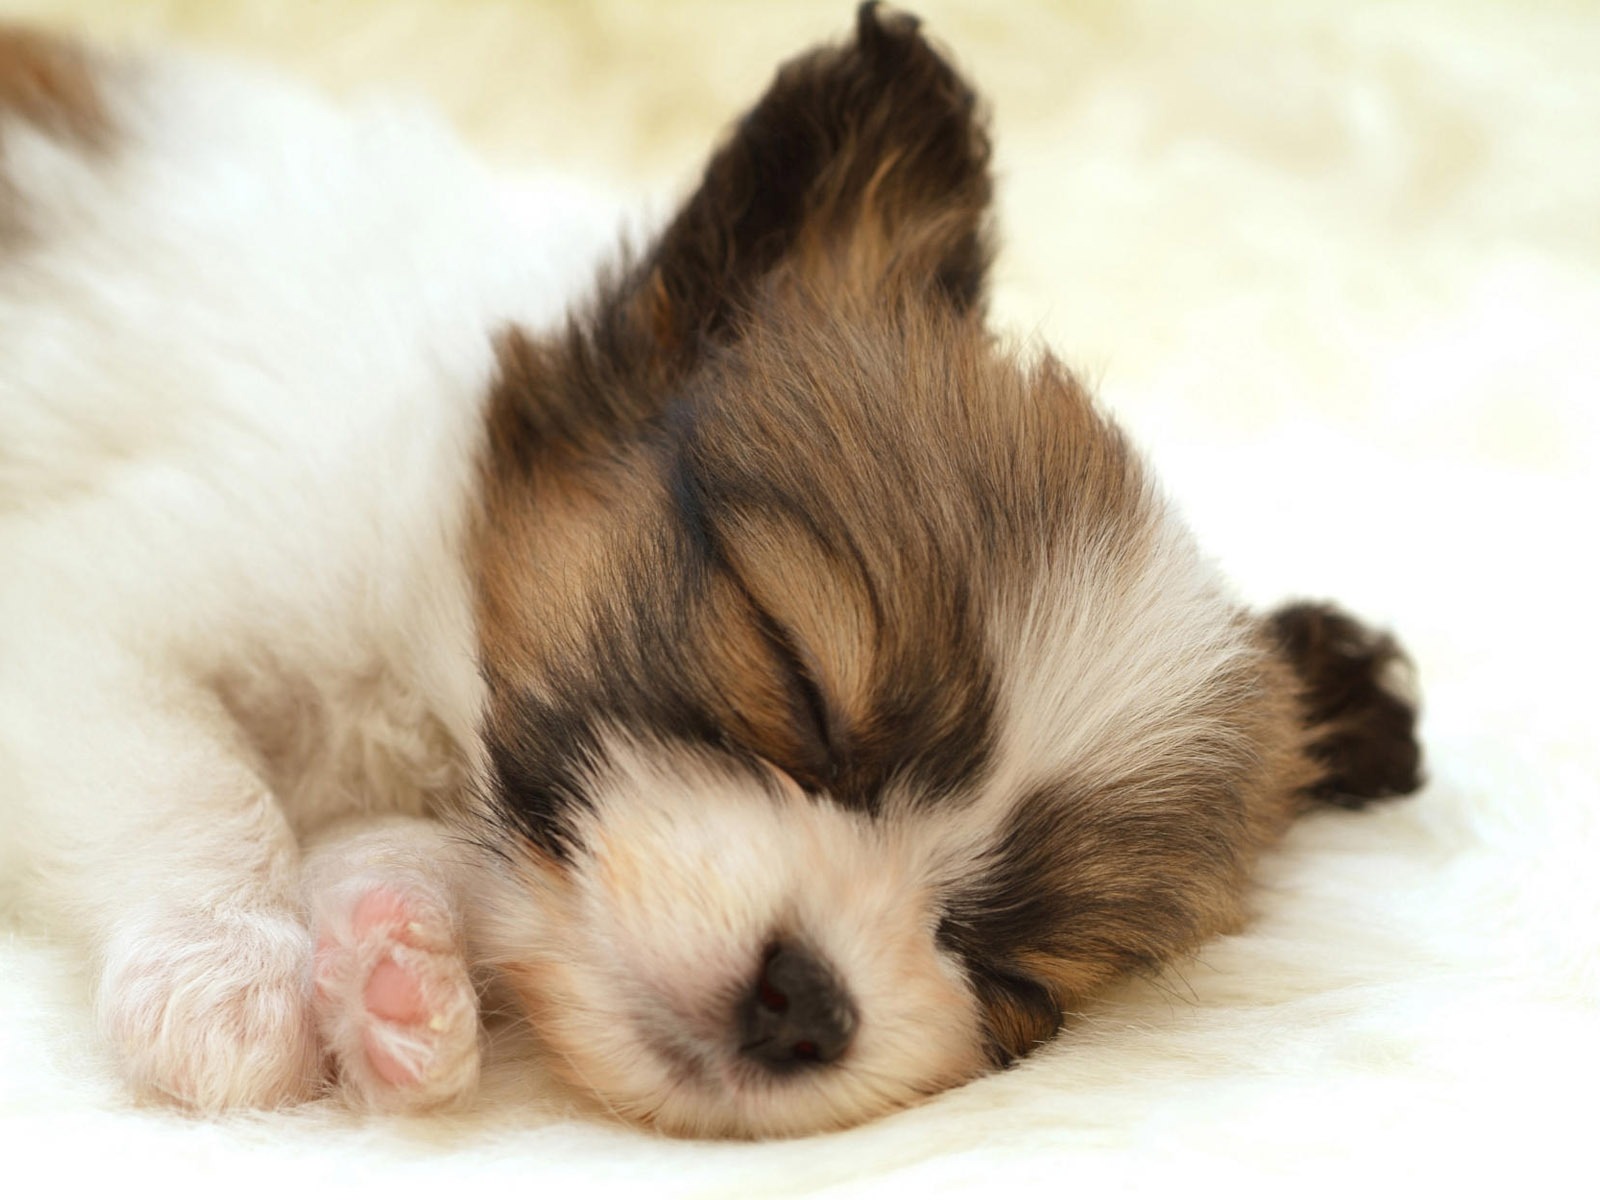 Puppy Photo HD wallpapers (10) #10 - 1600x1200